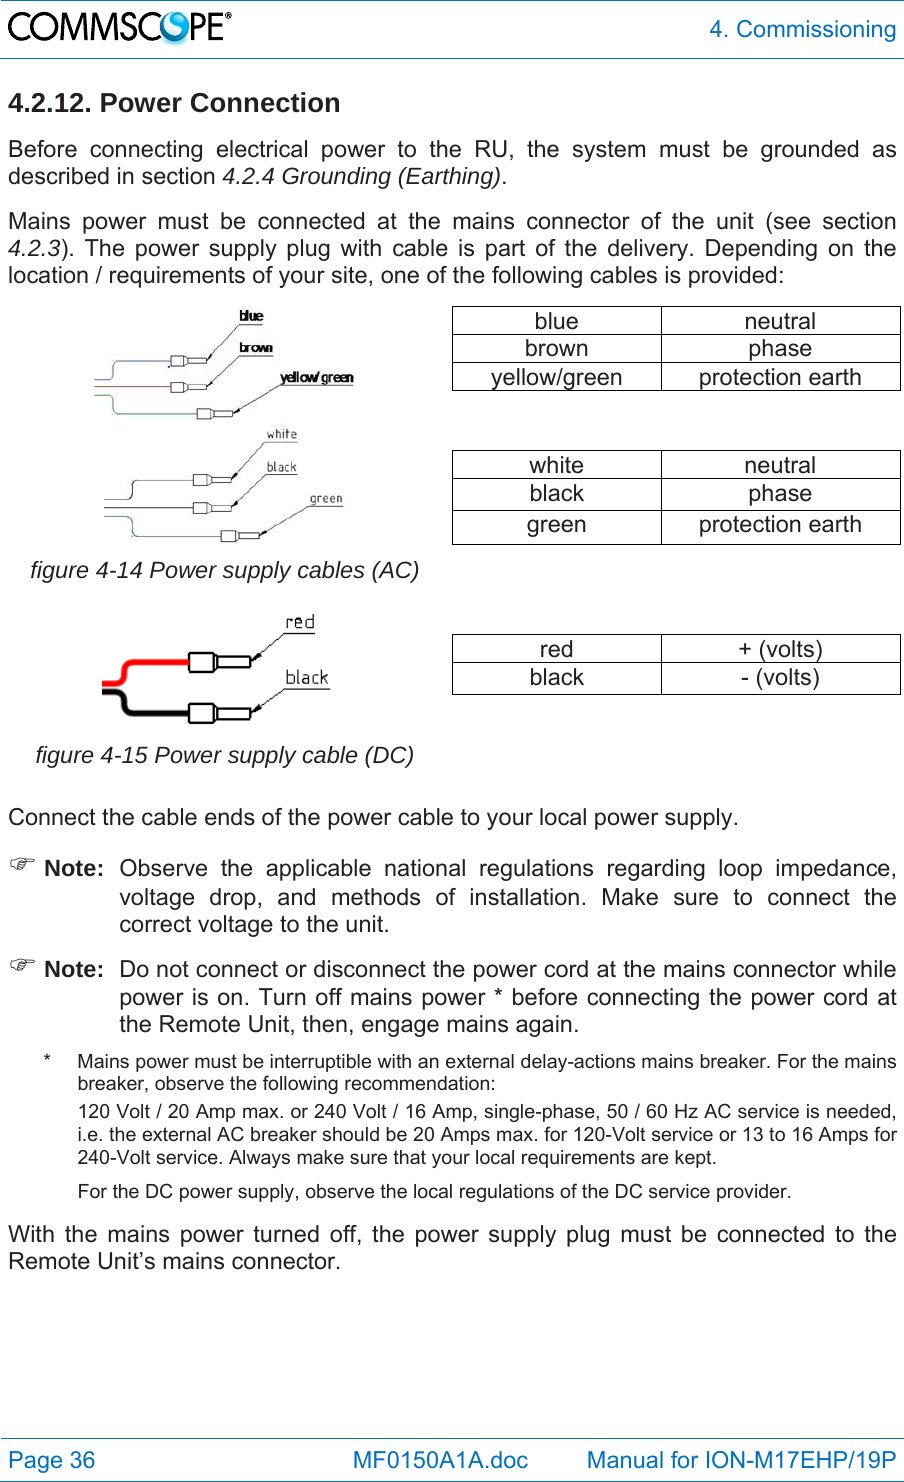  4. Commissioning Page 36            MF0150A1A.doc         Manual for ION-M17EHP/19P 4.2.12. Power Connection Before connecting electrical power to the RU, the system must be grounded as described in section 4.2.4 Grounding (Earthing).  Mains power must be connected at the mains connector of the unit (see section 4.2.3). The power supply plug with cable is part of the delivery. Depending on the location / requirements of your site, one of the following cables is provided: blue neutral brown phase yellow/green protection earth     white neutral black phase green protection earth figure 4-14 Power supply cables (AC)      red + (volts) black - (volts)   figure 4-15 Power supply cable (DC)    Connect the cable ends of the power cable to your local power supply.  Note:  Observe the applicable national regulations regarding loop impedance, voltage drop, and methods of installation. Make sure to connect the correct voltage to the unit.  Note:  Do not connect or disconnect the power cord at the mains connector while power is on. Turn off mains power * before connecting the power cord at the Remote Unit, then, engage mains again. *   Mains power must be interruptible with an external delay-actions mains breaker. For the mains breaker, observe the following recommendation: 120 Volt / 20 Amp max. or 240 Volt / 16 Amp, single-phase, 50 / 60 Hz AC service is needed, i.e. the external AC breaker should be 20 Amps max. for 120-Volt service or 13 to 16 Amps for 240-Volt service. Always make sure that your local requirements are kept. For the DC power supply, observe the local regulations of the DC service provider. With the mains power turned off, the power supply plug must be connected to the Remote Unit’s mains connector.   